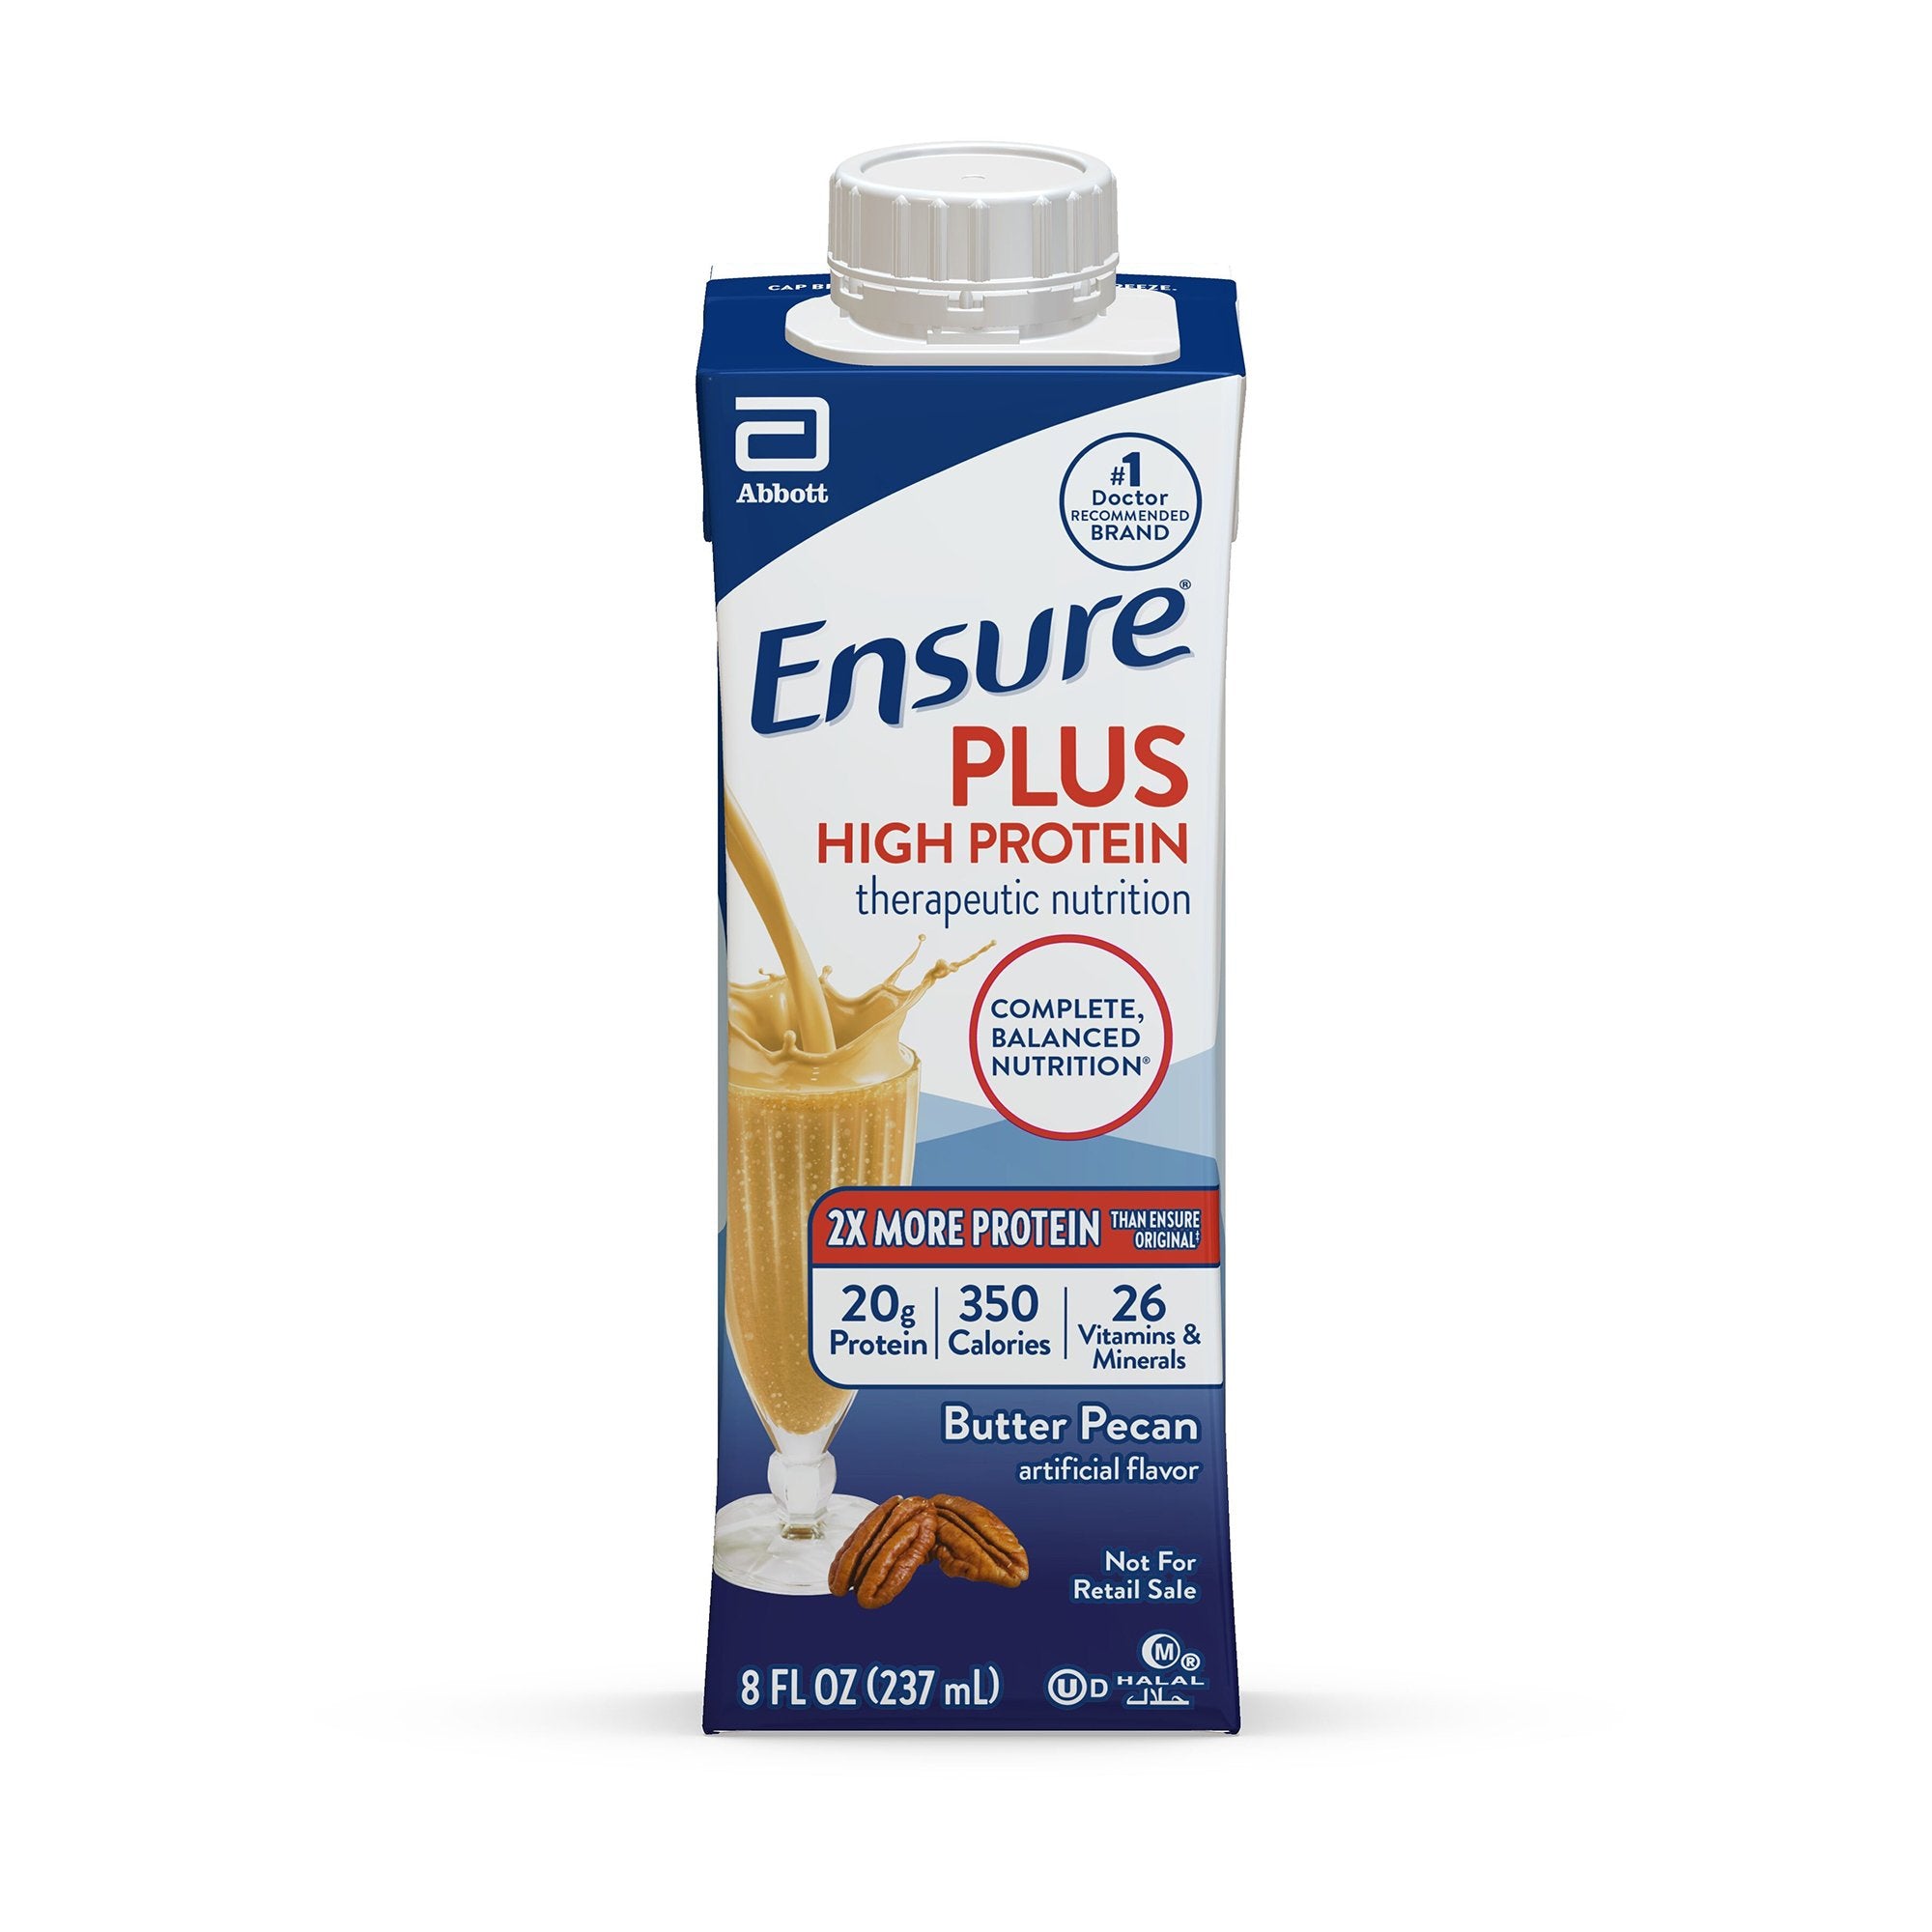 Ensure Plus High Protein Nutritional Drink, Butter Pecan, 8 oz. Carton -Case of 24